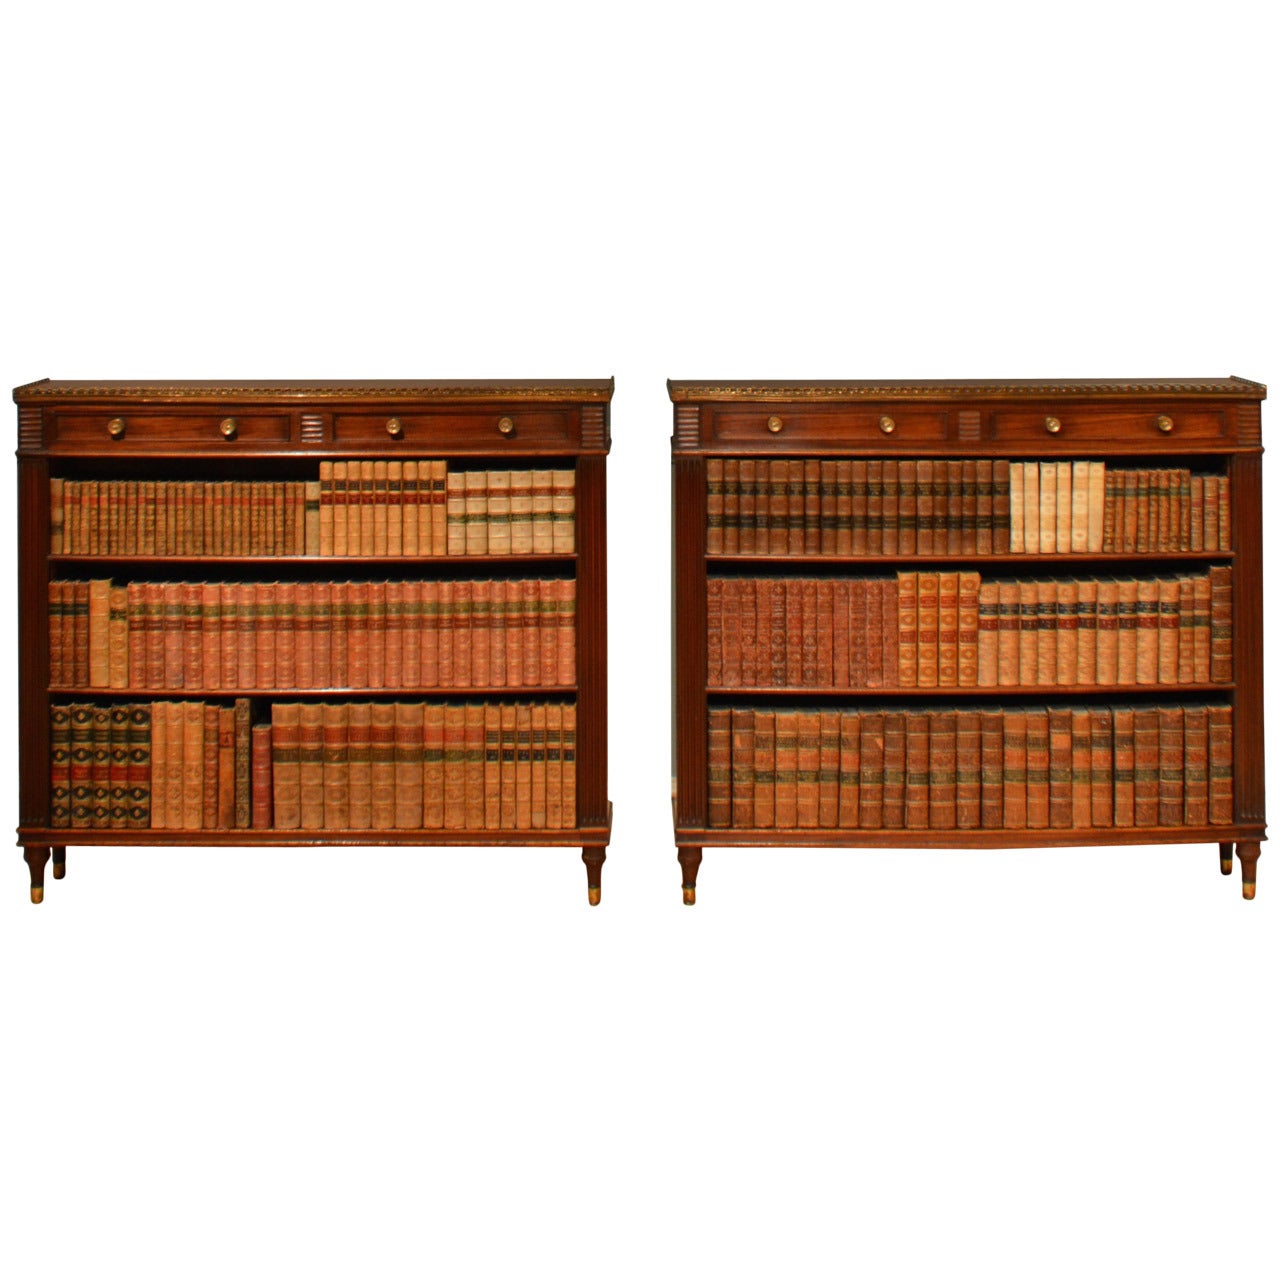 Pair of Early 19th Century Low Bookcases